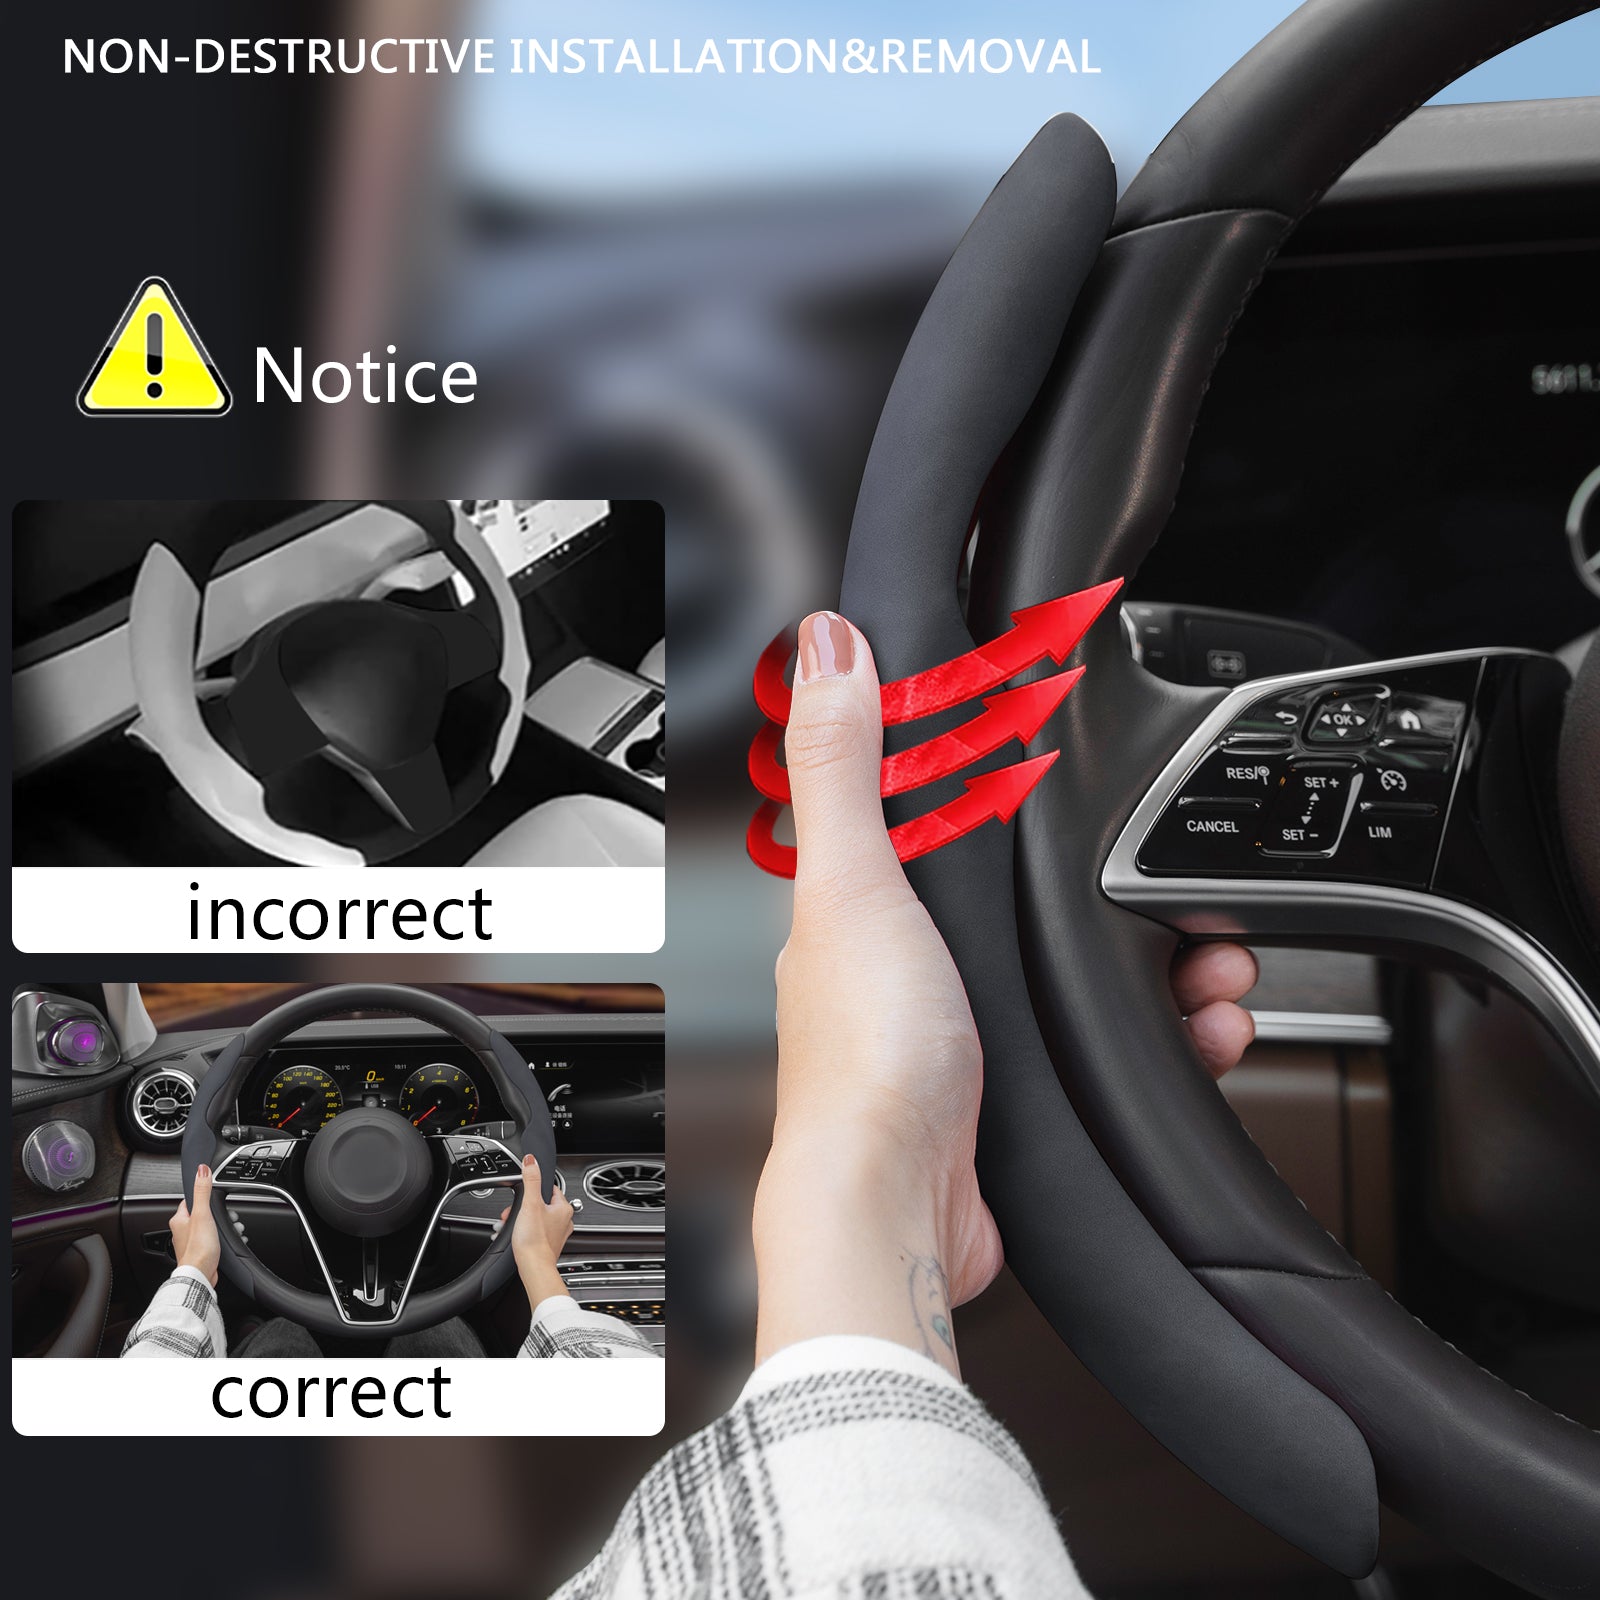 tesla model 3 Y car 2022 2023 2021 2020 2019 2018 s3xy Segmented Steering Wheel Liquid Leather Cover Cover arcoche accessories accessory aftermarket price Vehicles standard long range performance sr+ electric car rwd ev interior exterior diy decoration price elon musk must have black white red blue 5 7 seats seat